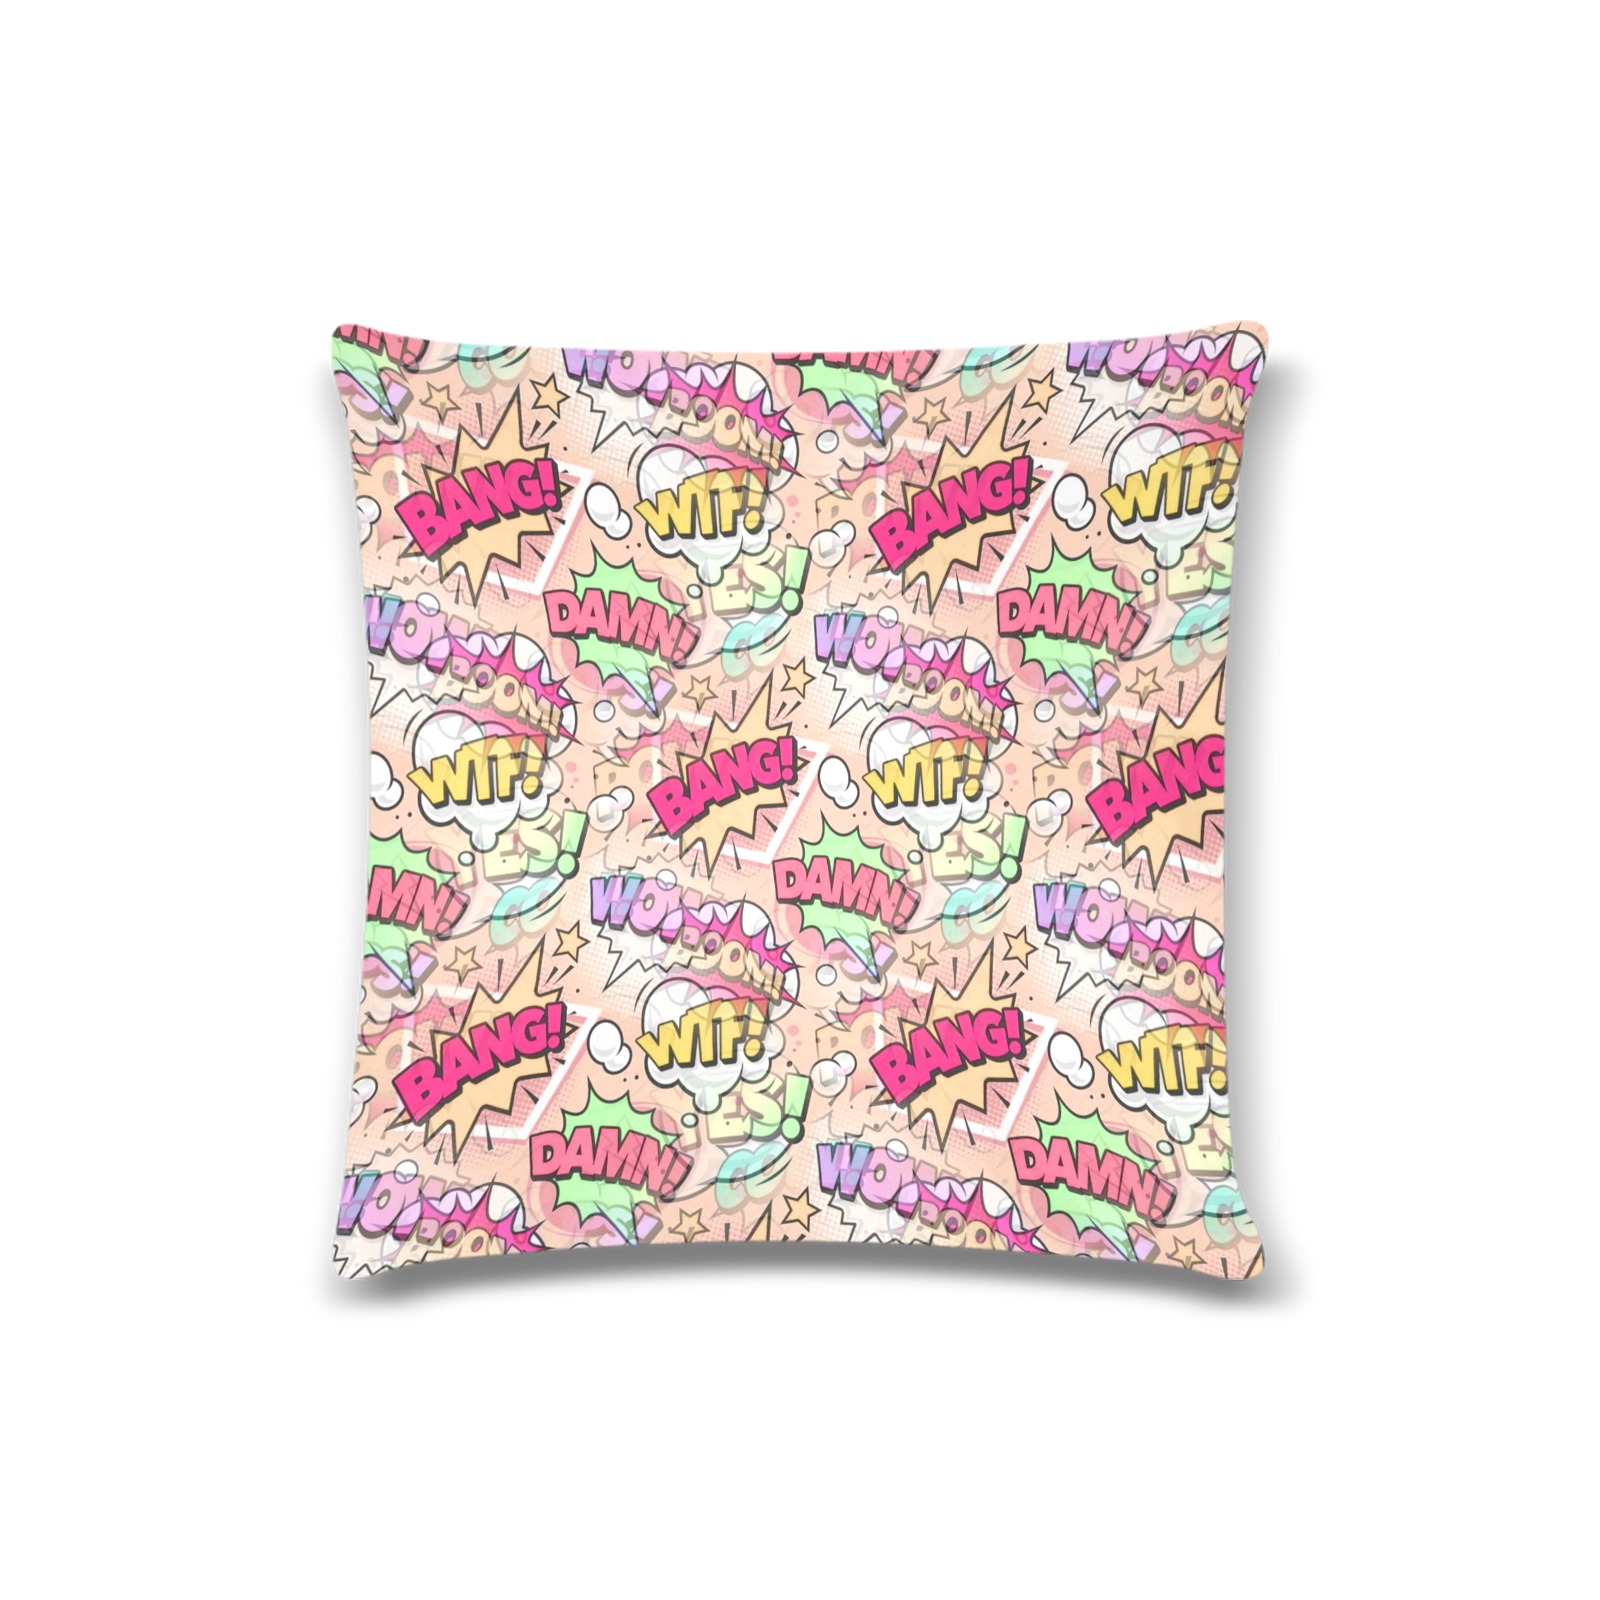 Was stimmt ... by Nico Bielow Custom Zippered Pillow Case 16"x16"(Twin Sides)